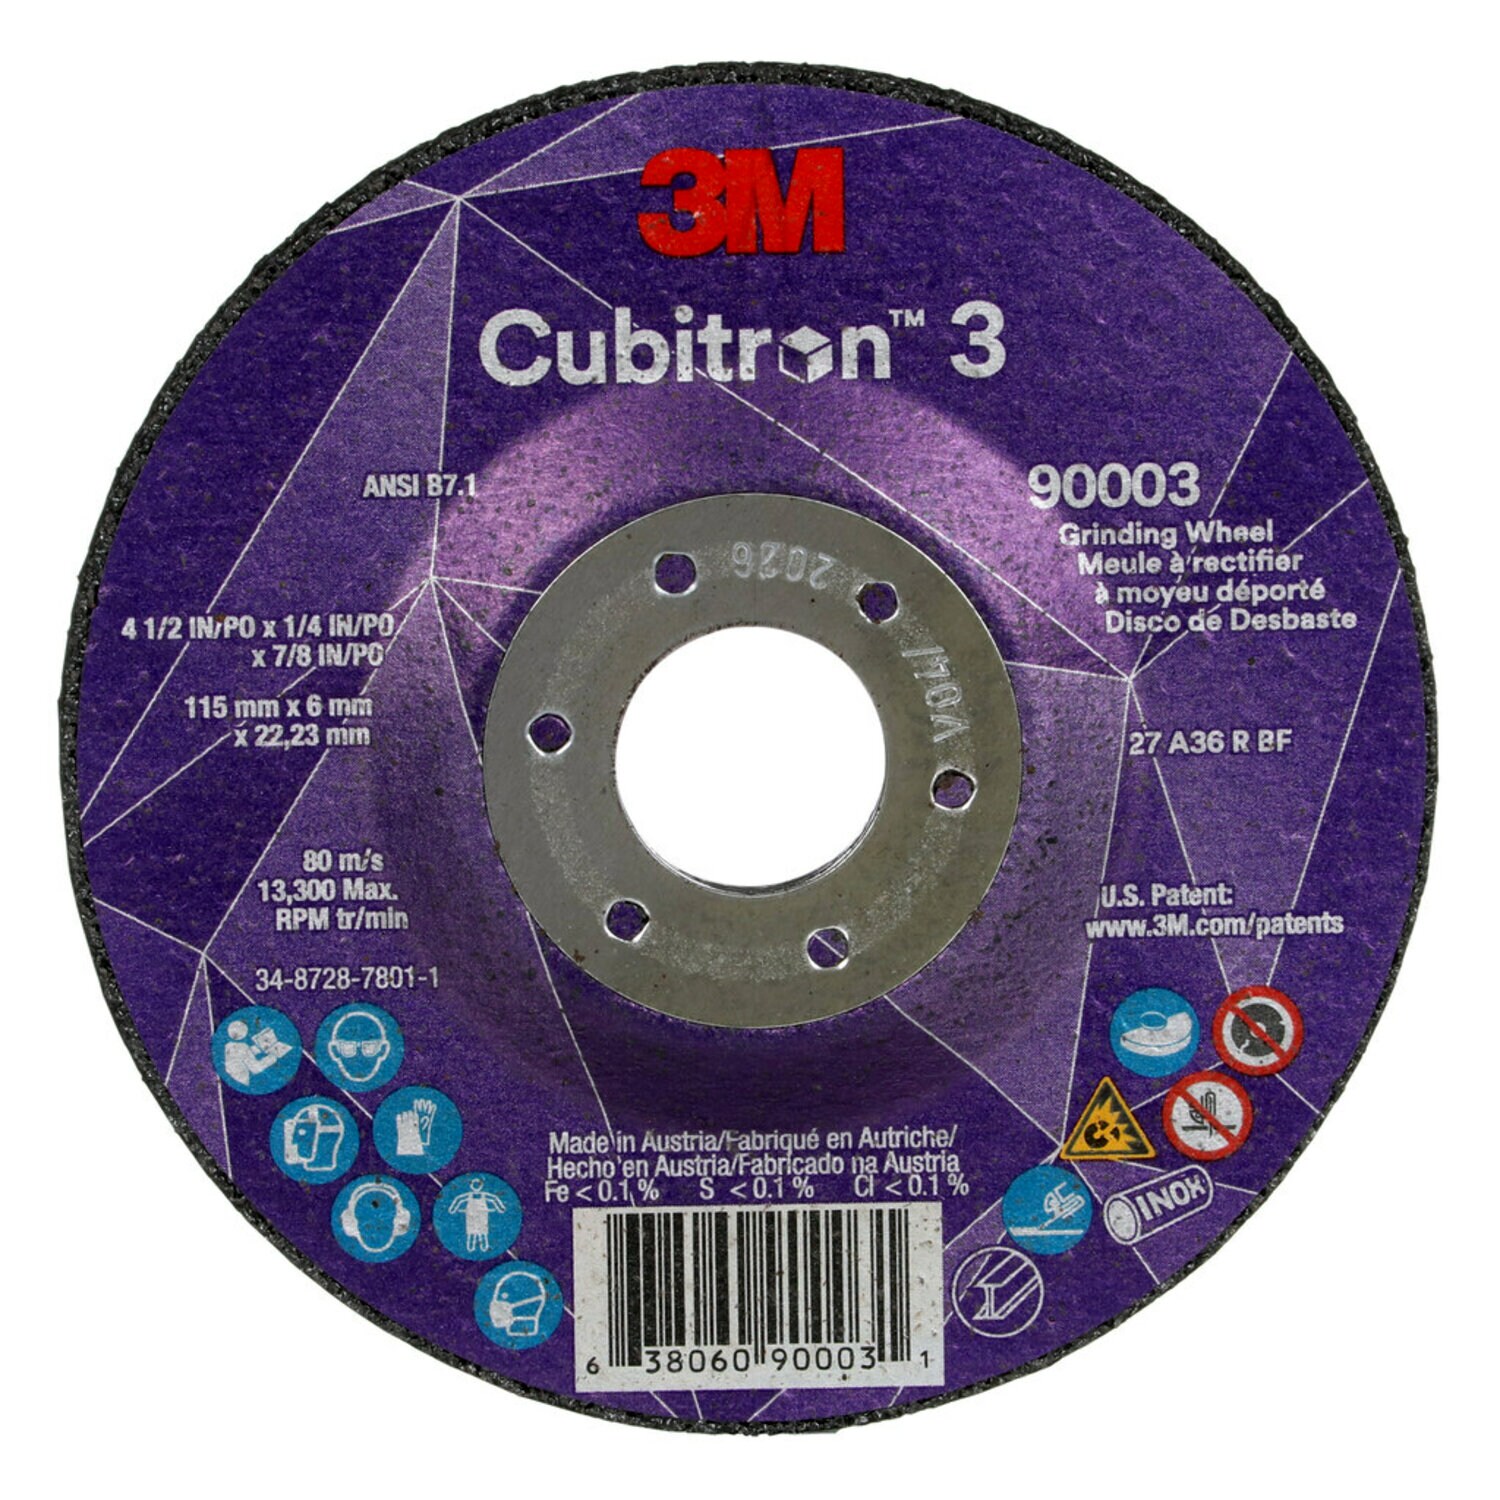 7100303966 - 3M Cubitron 3 Depressed Center Grinding Wheel, 90003, 36+, T27, 4-1/2
in x 1/4 in x7/8 in (11x6x22.23) ANSI, 10/Pack, 20 ea/Case